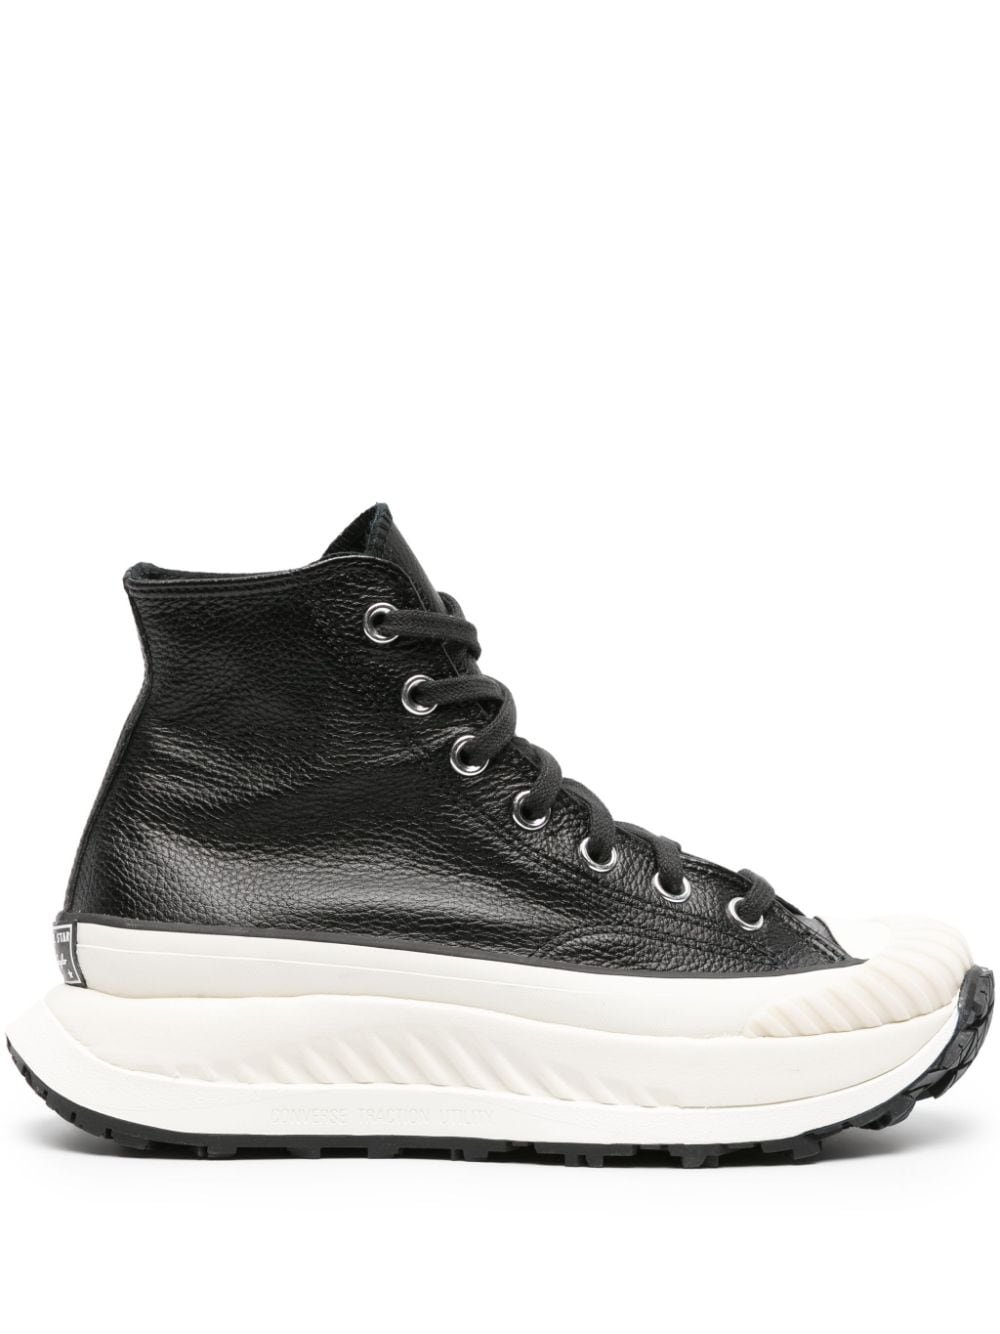 Converse Chuck 70 chunky leather sneakers - Black von Converse